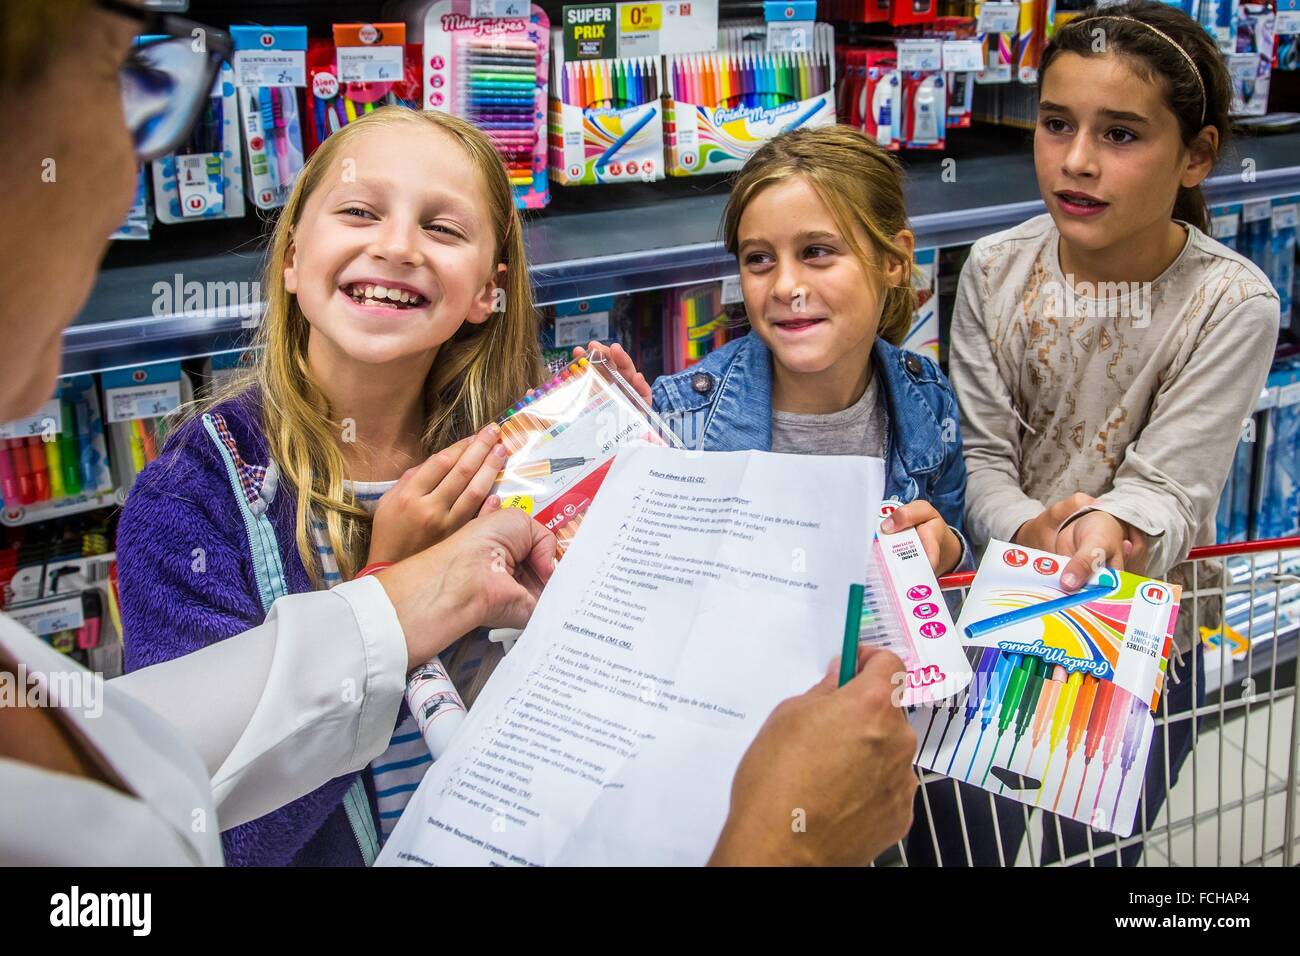 BACK-TO-SCHOOL ILLUSTRATION, BUYING SCHOOL SUPPLIES AT A SUPERMARKET Stock Photo